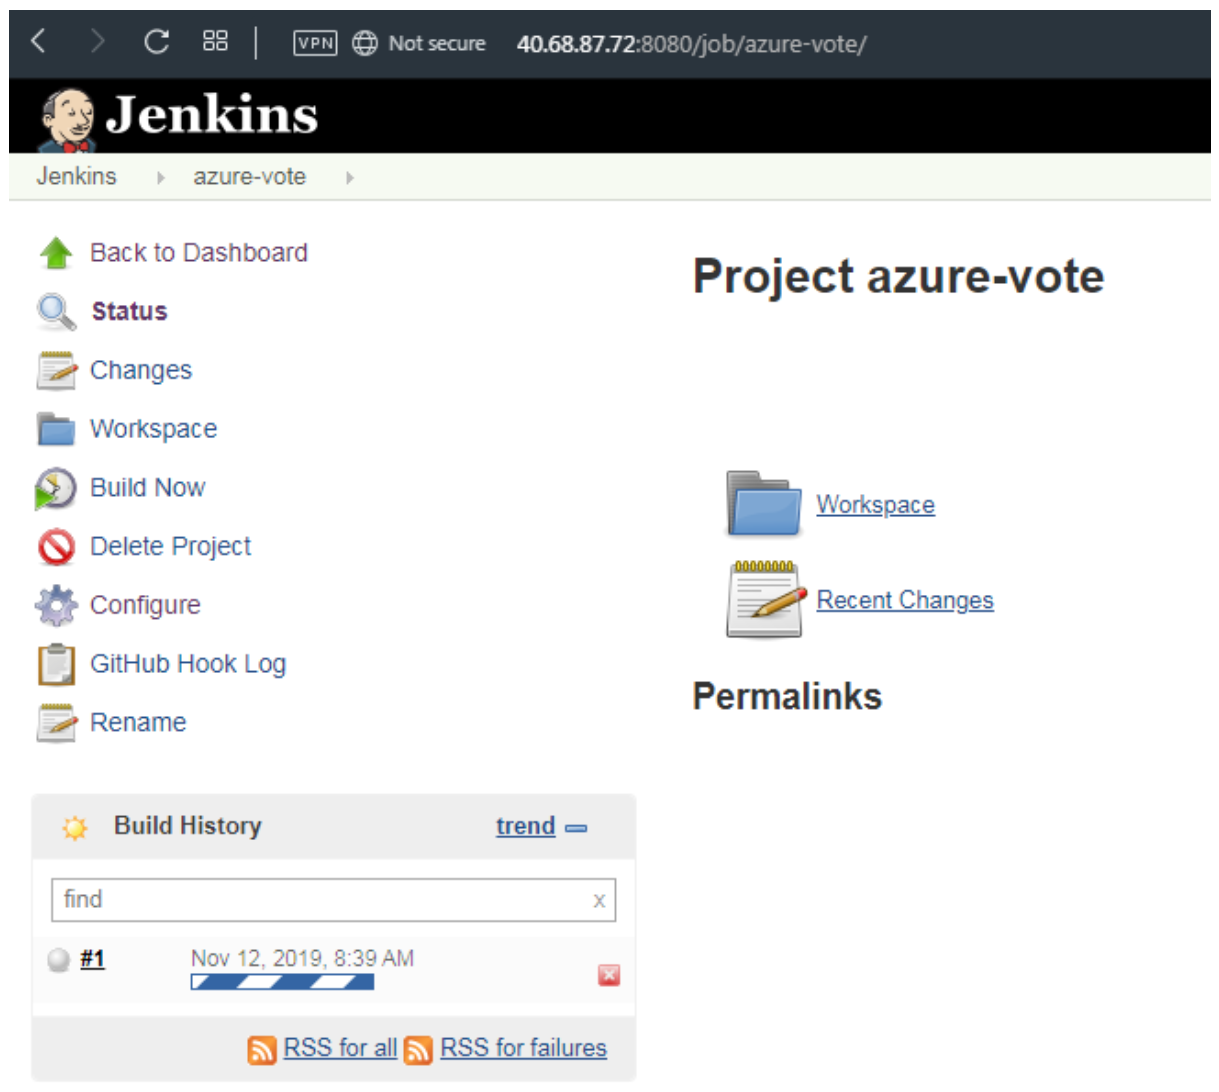 Test the Jenkins Project 1